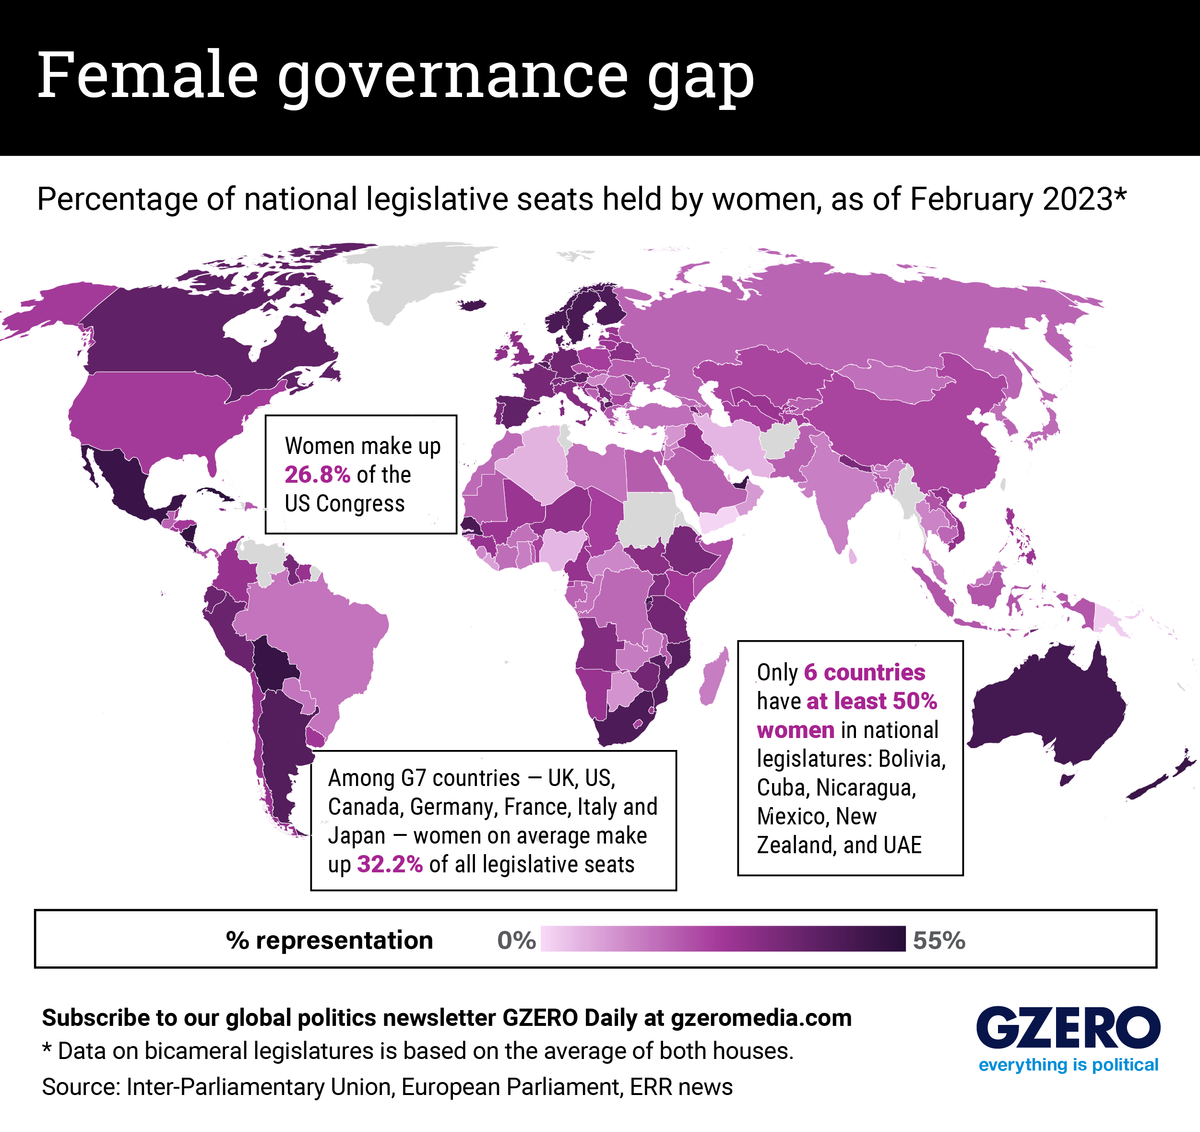 Graphic showing percentage of national legislative seats held by women globally, as of February 2023.